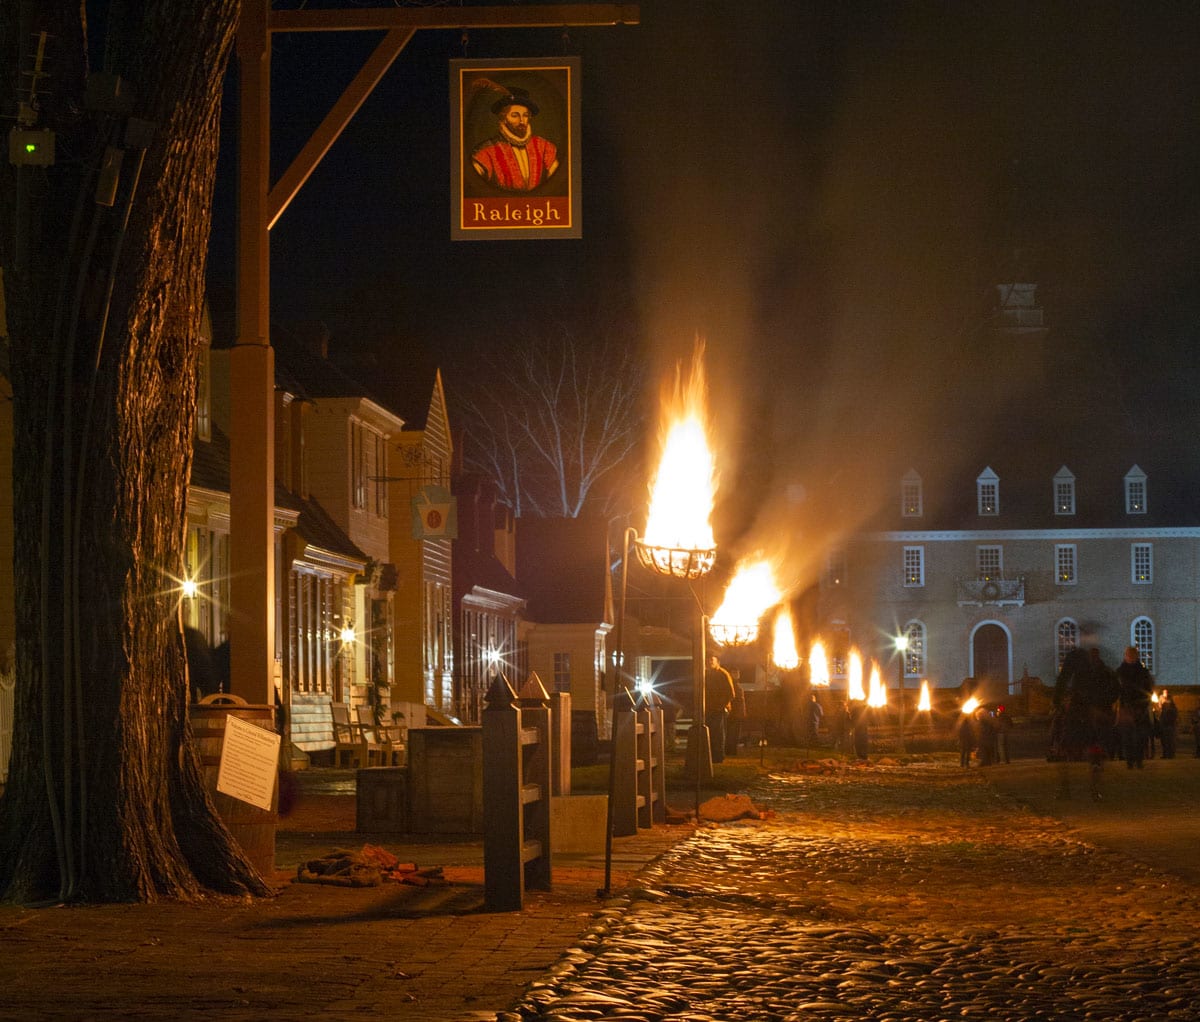 Colonial Williamsburg: Lighting of the Cressets